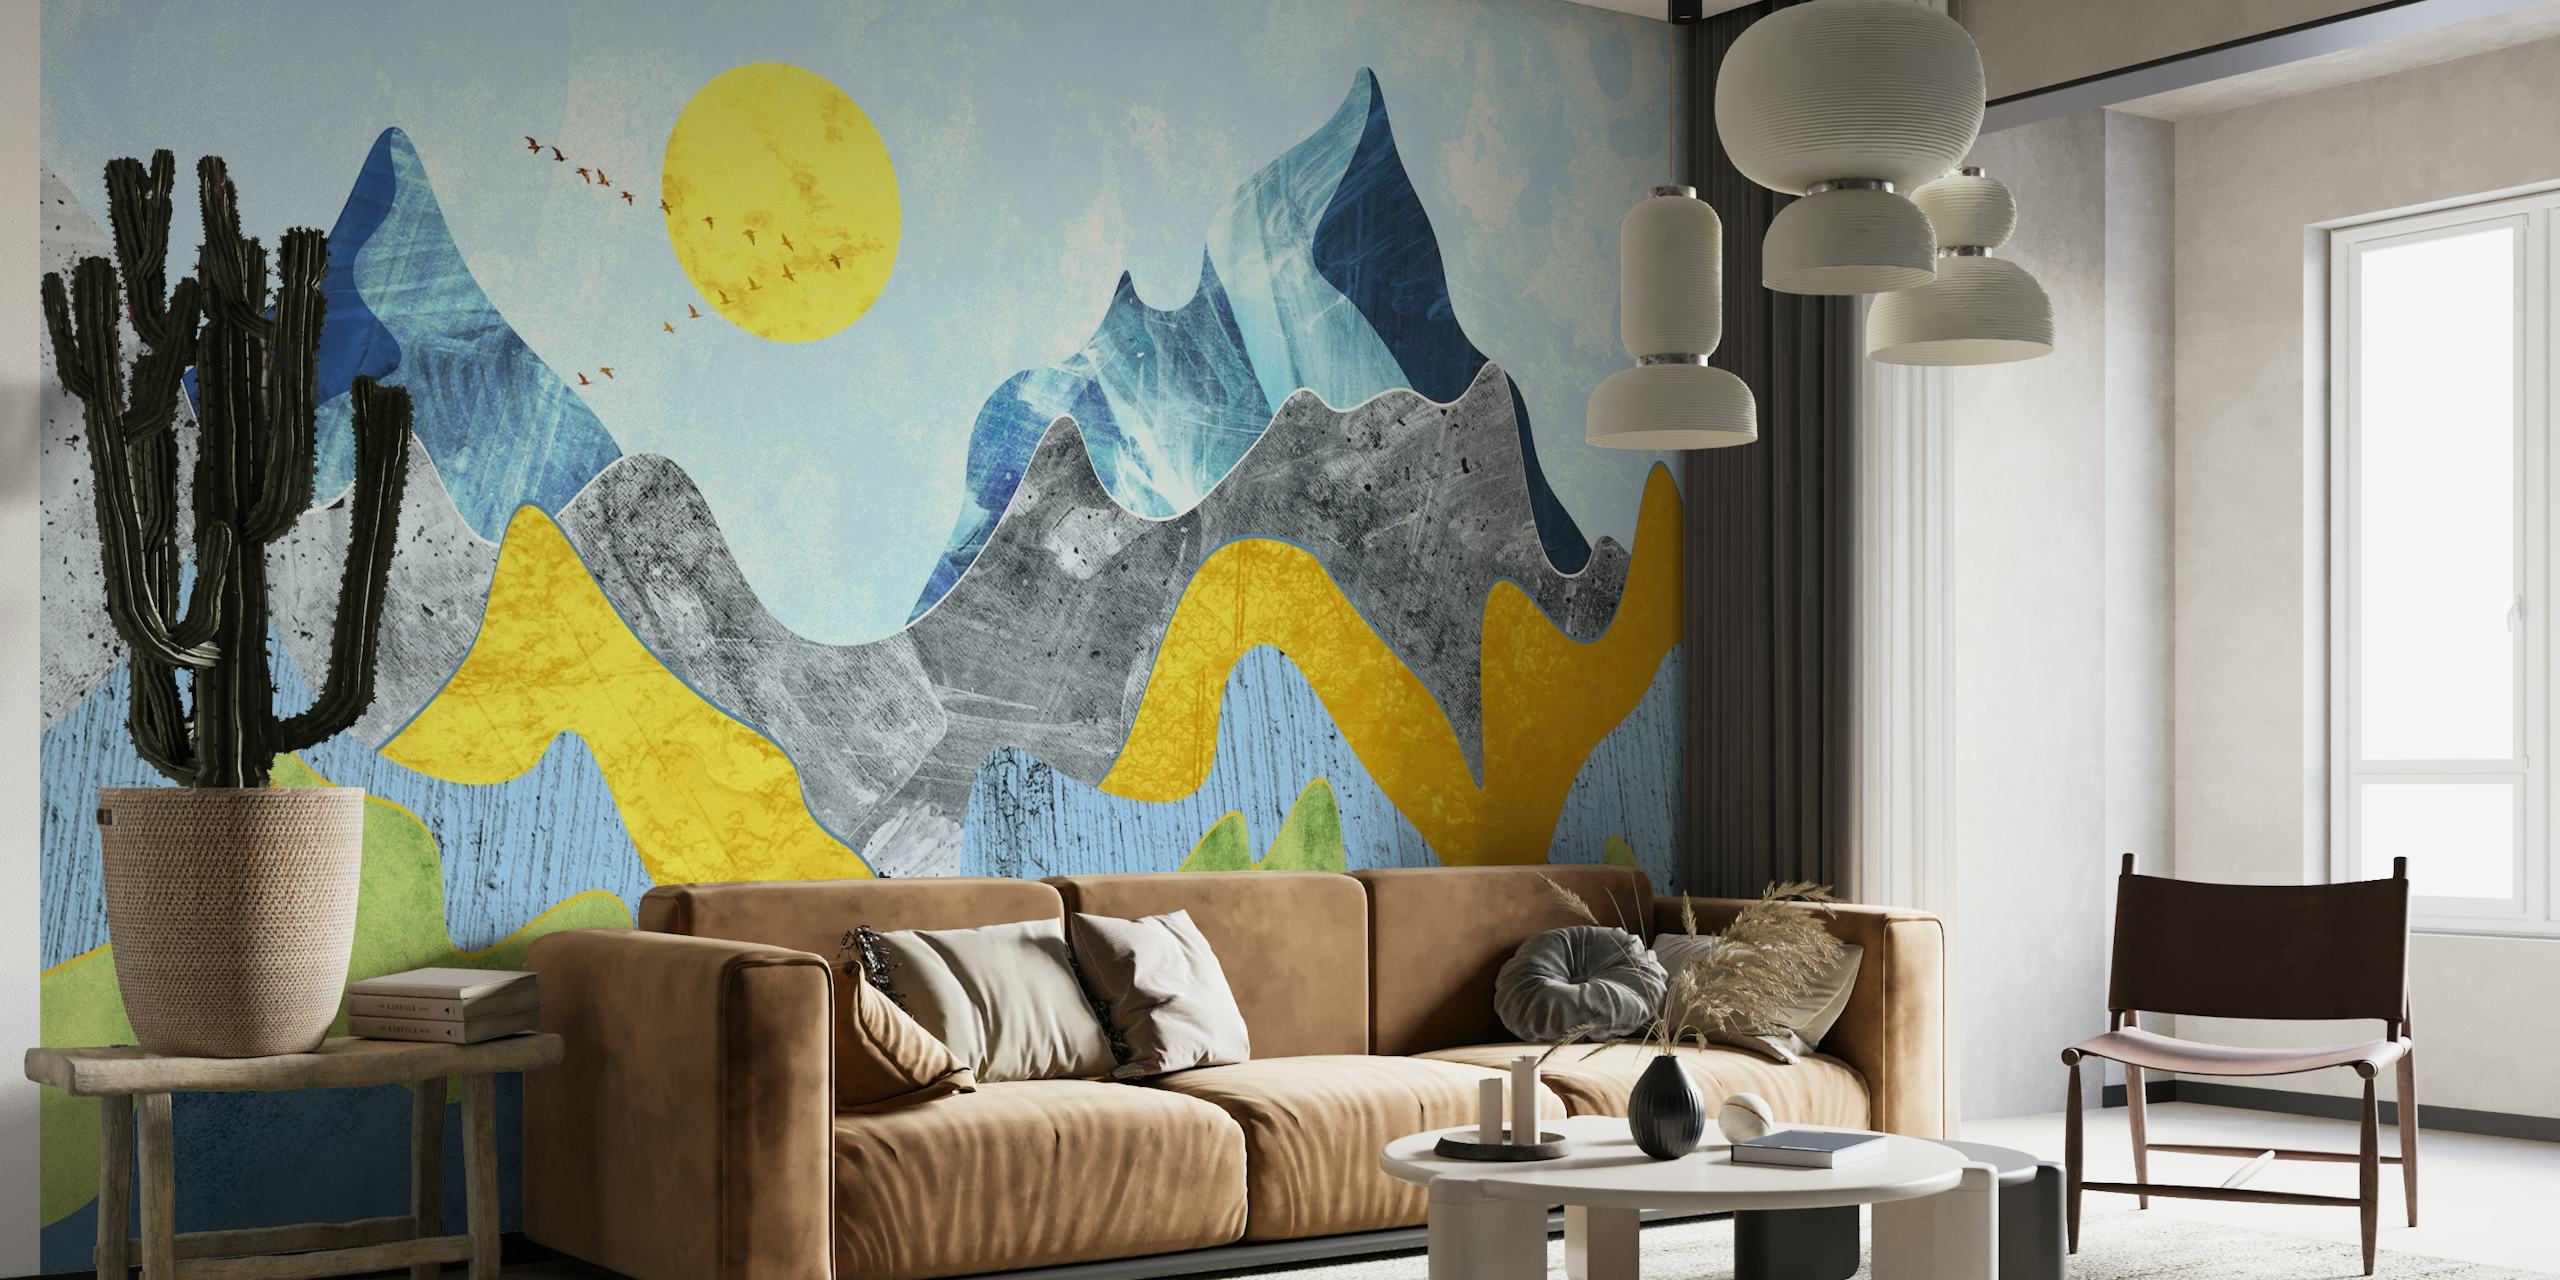 The Marbled mountains papel pintado